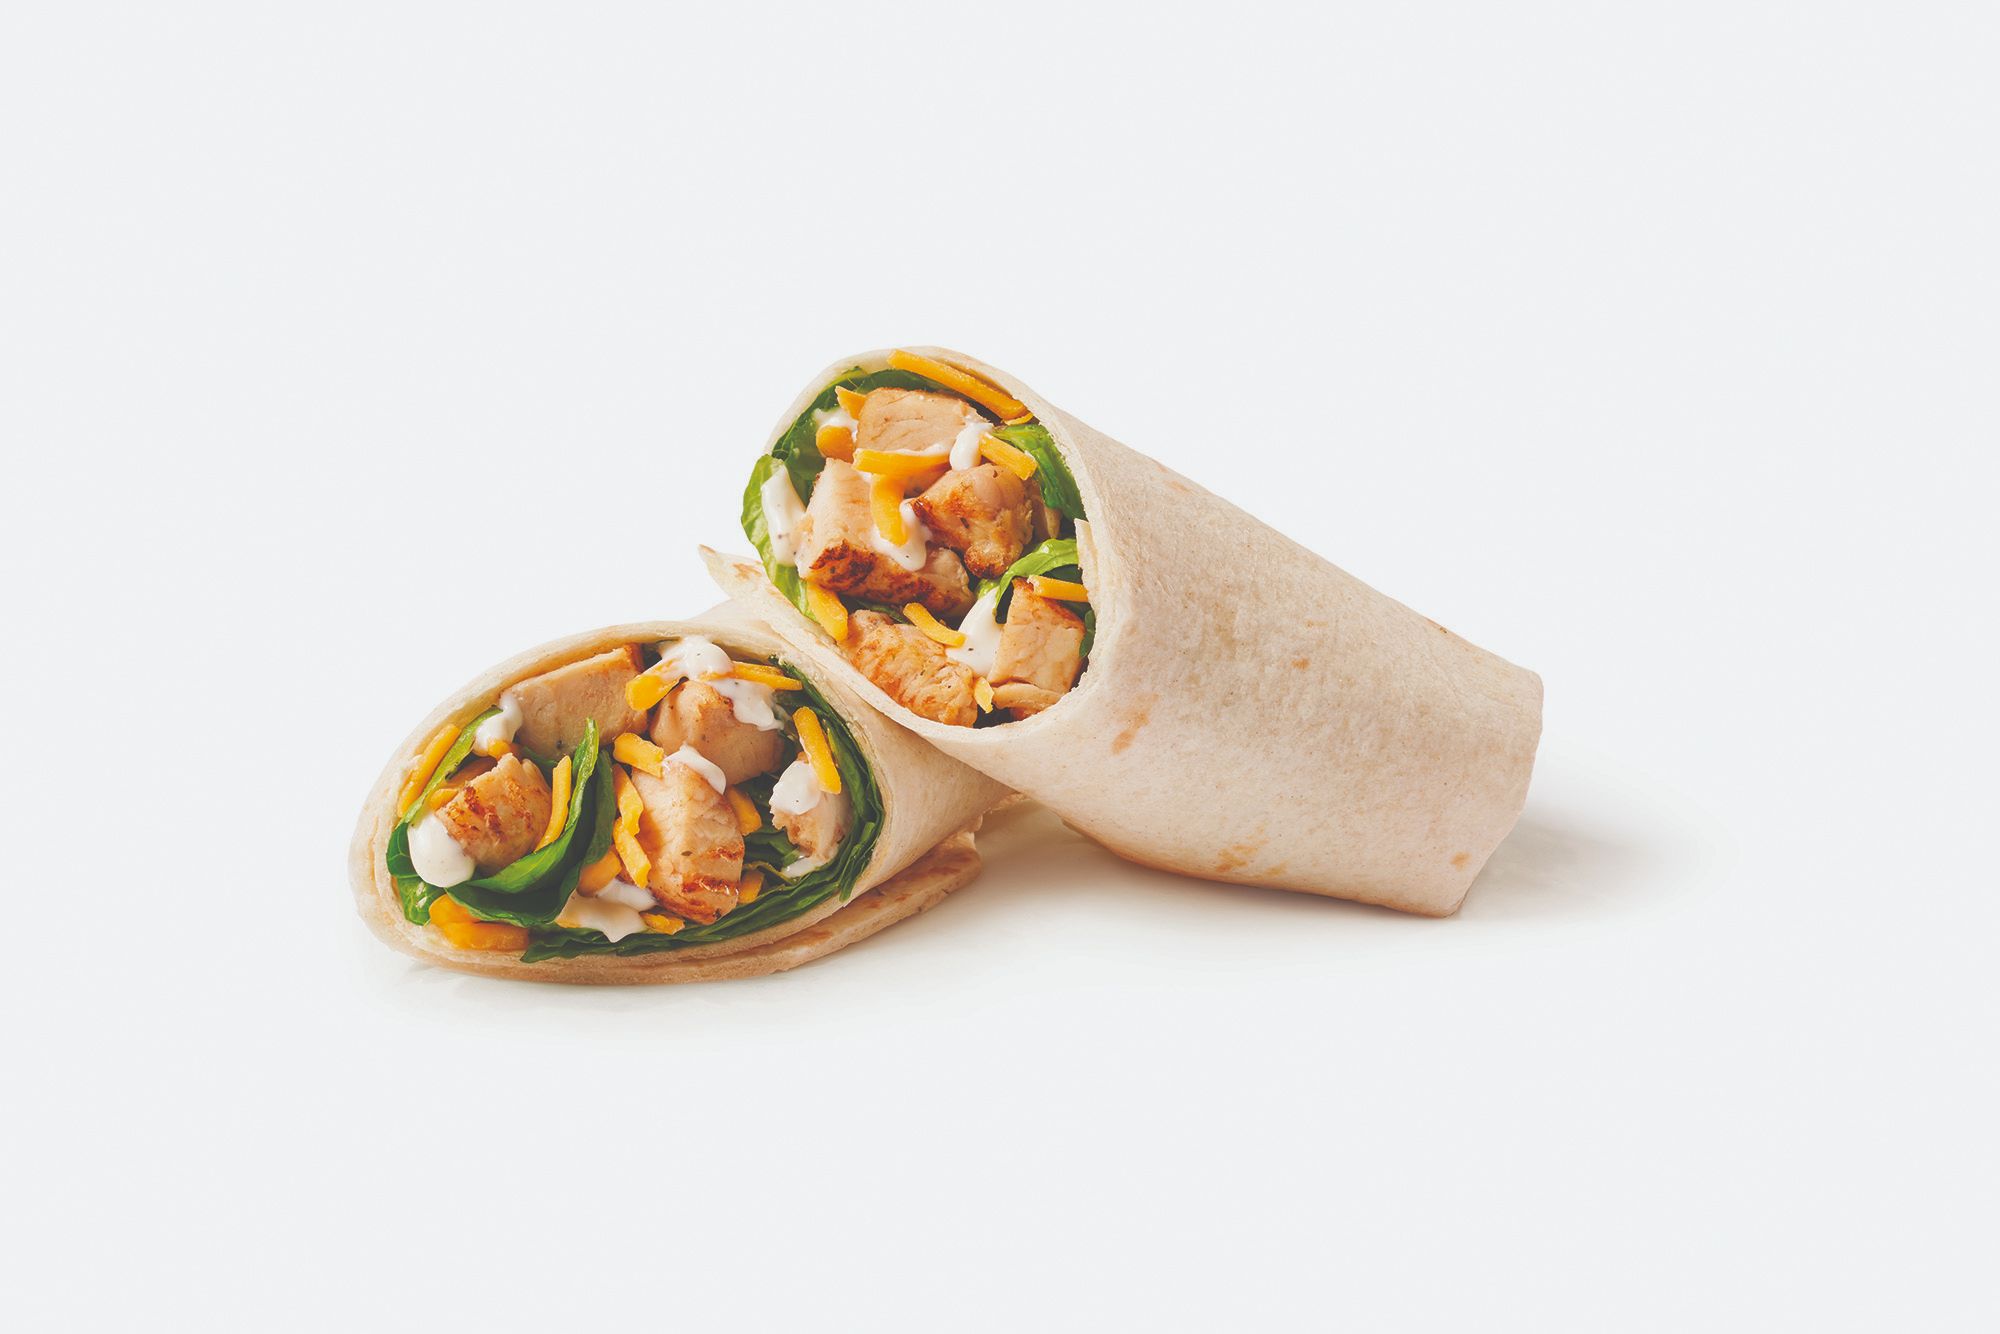 18-grilled-chicken-go-wrap-nutrition-facts